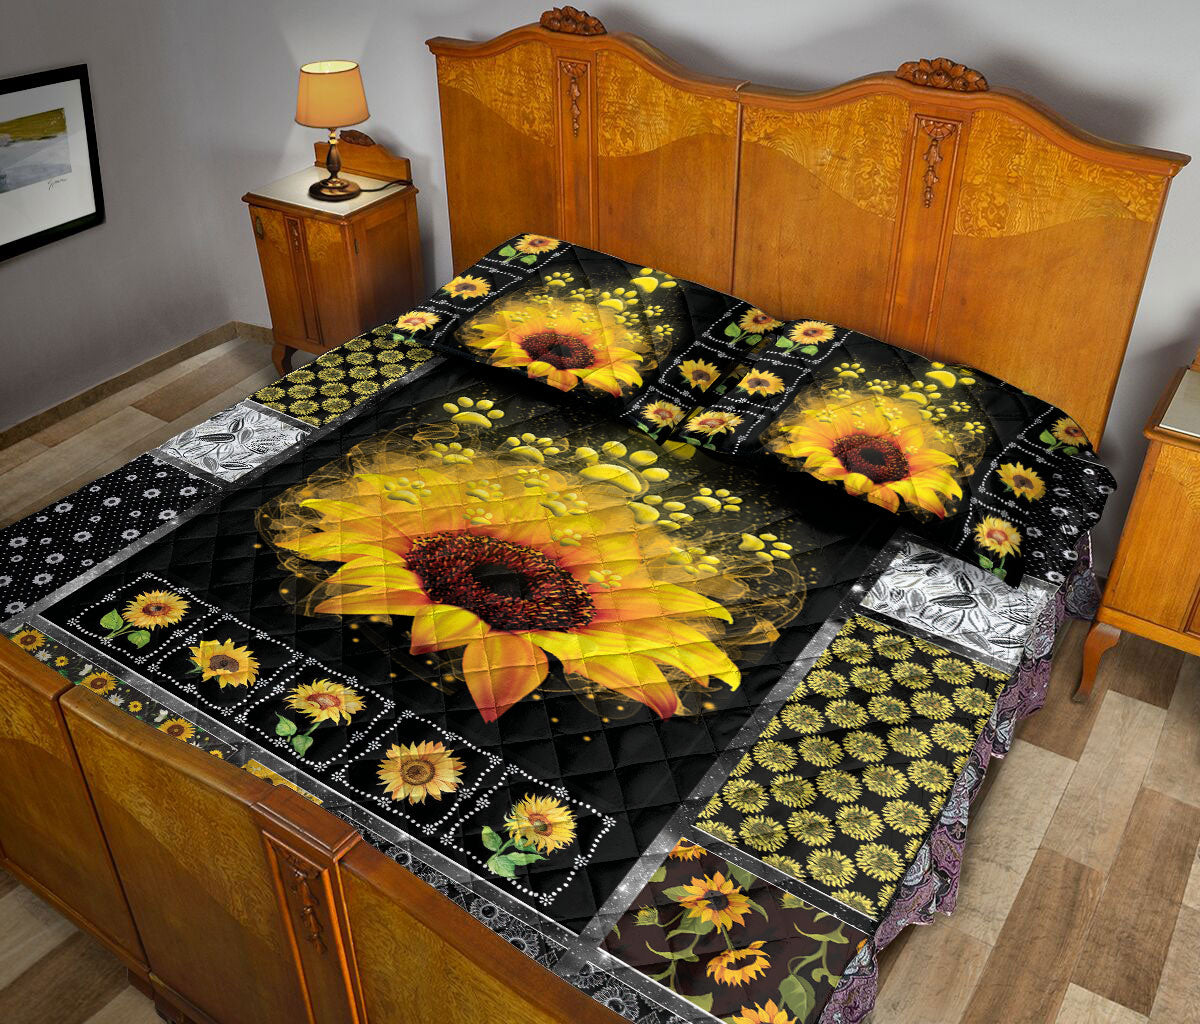 Ohaprints-Quilt-Bed-Set-Pillowcase-Dog-Cat-Paw-Love-Sunflower-Yellow-Floral-Patchwork-Pattern-Blanket-Bedspread-Bedding-2992-Queen (80'' x 90'')